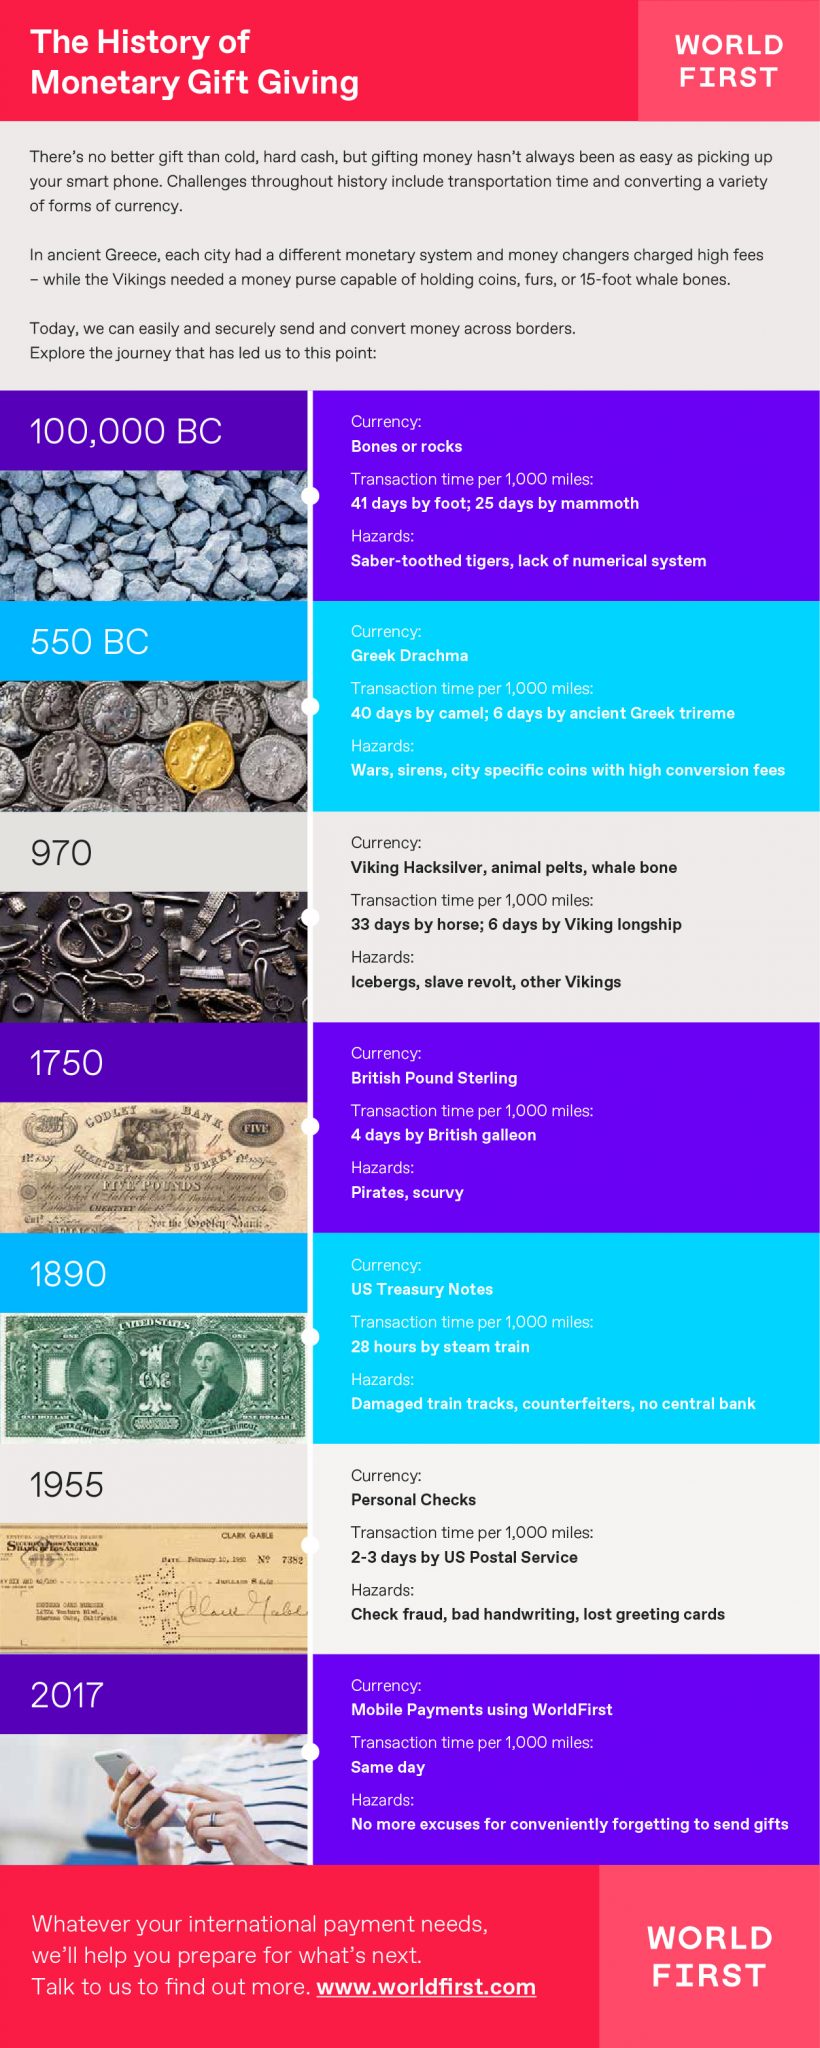 worldfirst_infographic_history_of_monetary_gift_giving